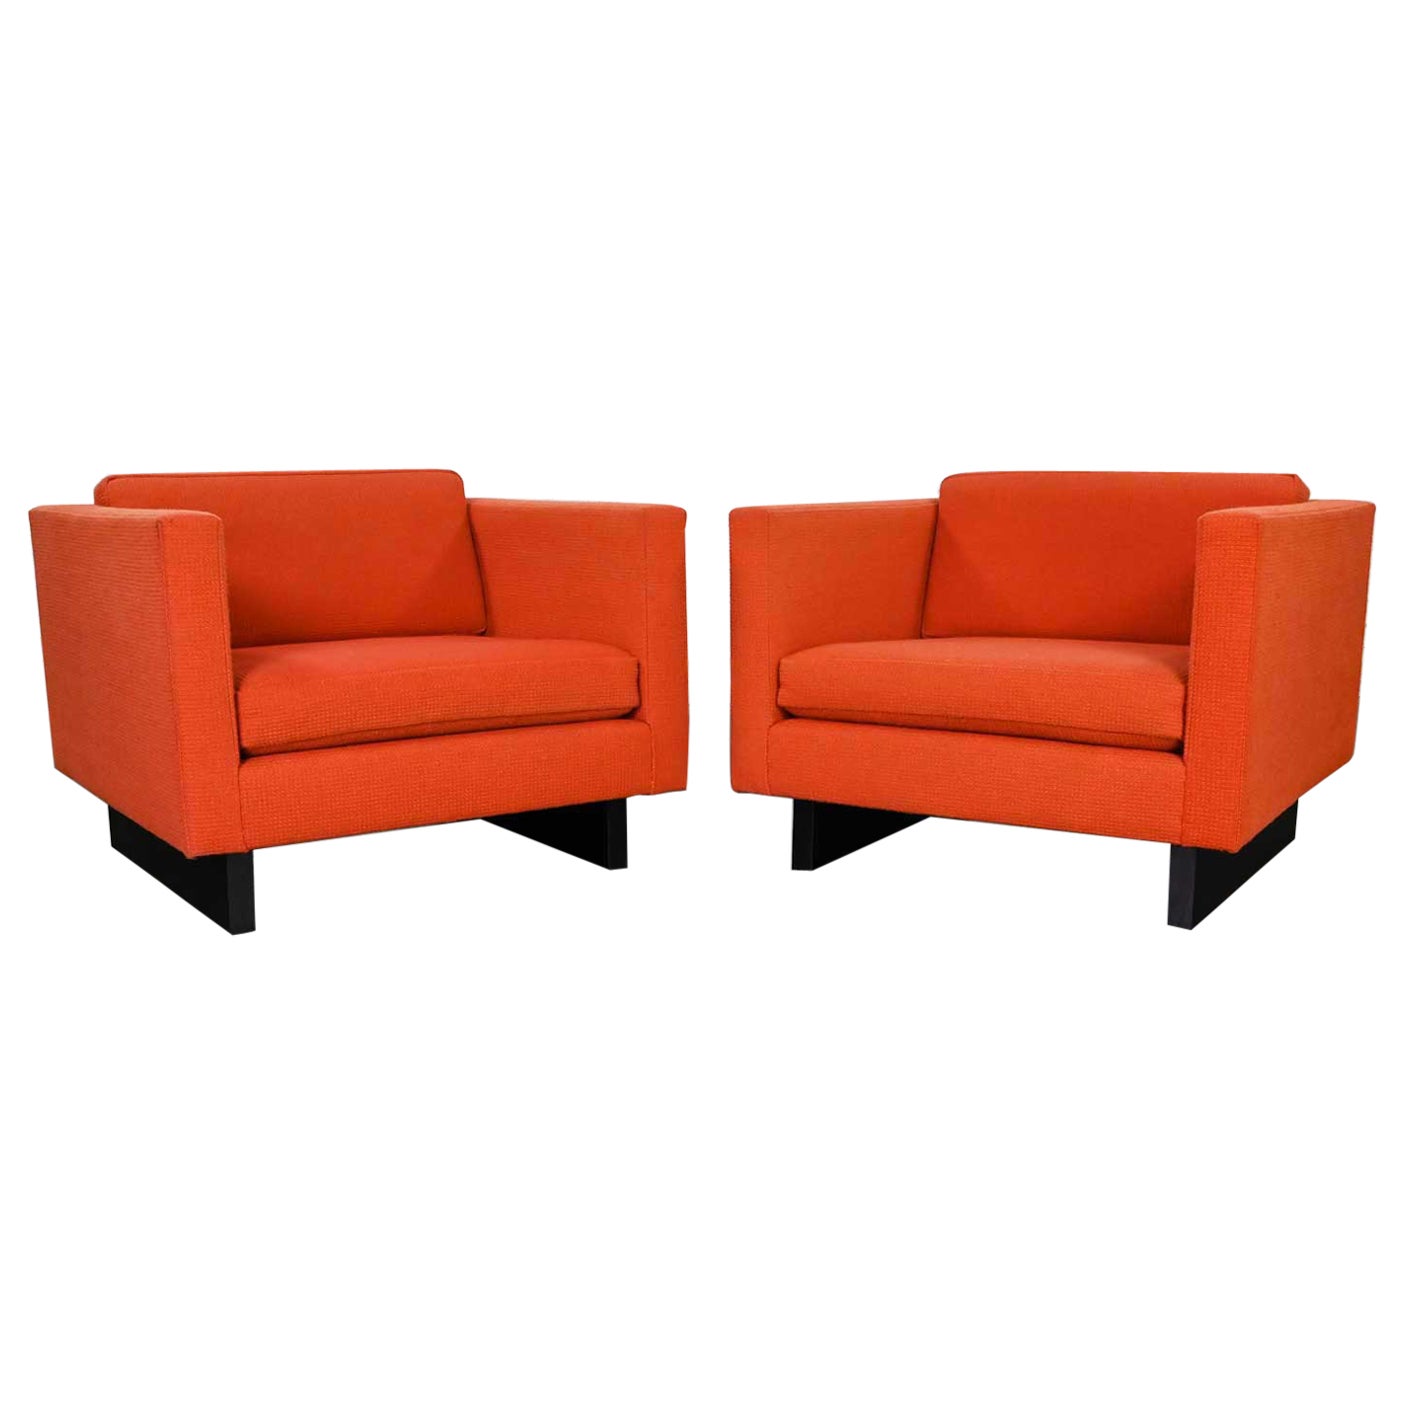 1970s Mcm to Modern Harvey Probber Club Chairs Orange 1571 Tuxedo Sleigh Bases For Sale